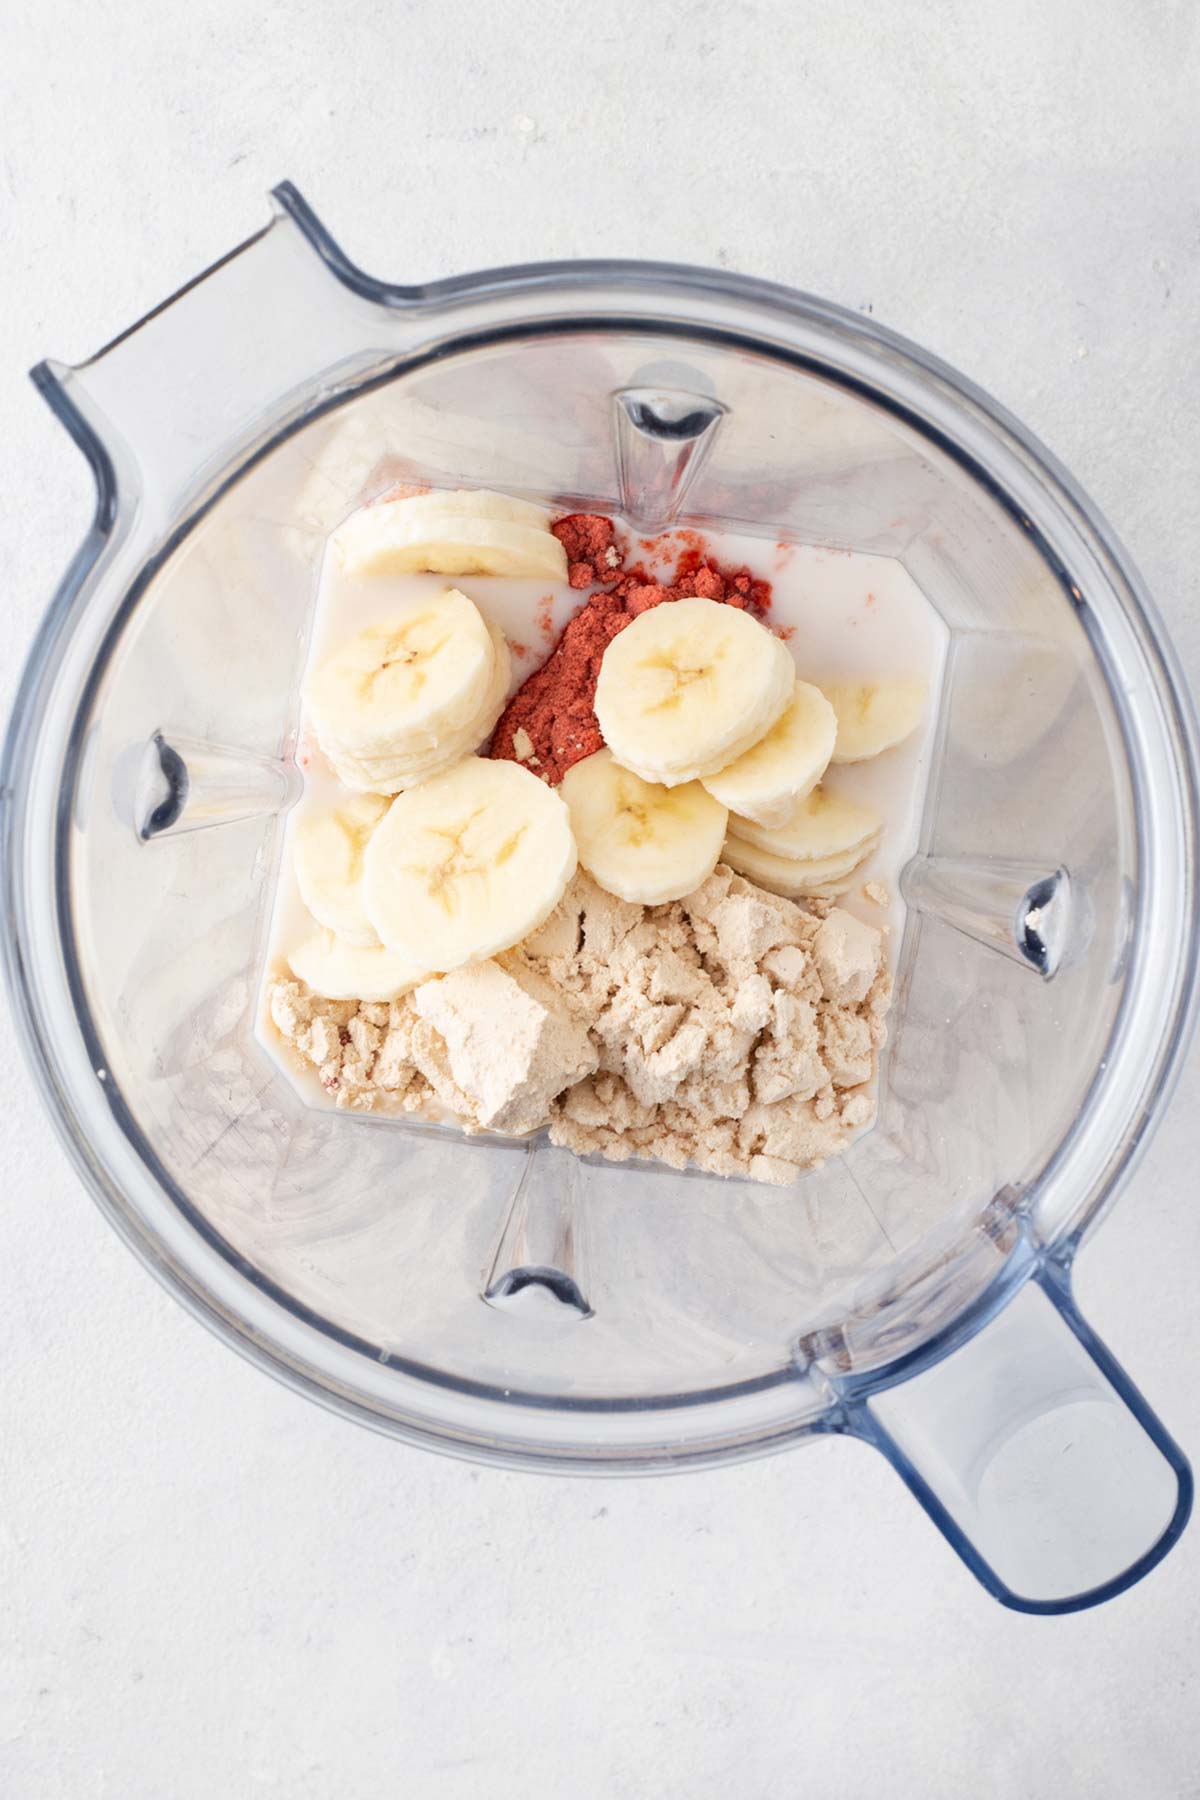 Ingredients for a strawberry banana protein shake in a blender.